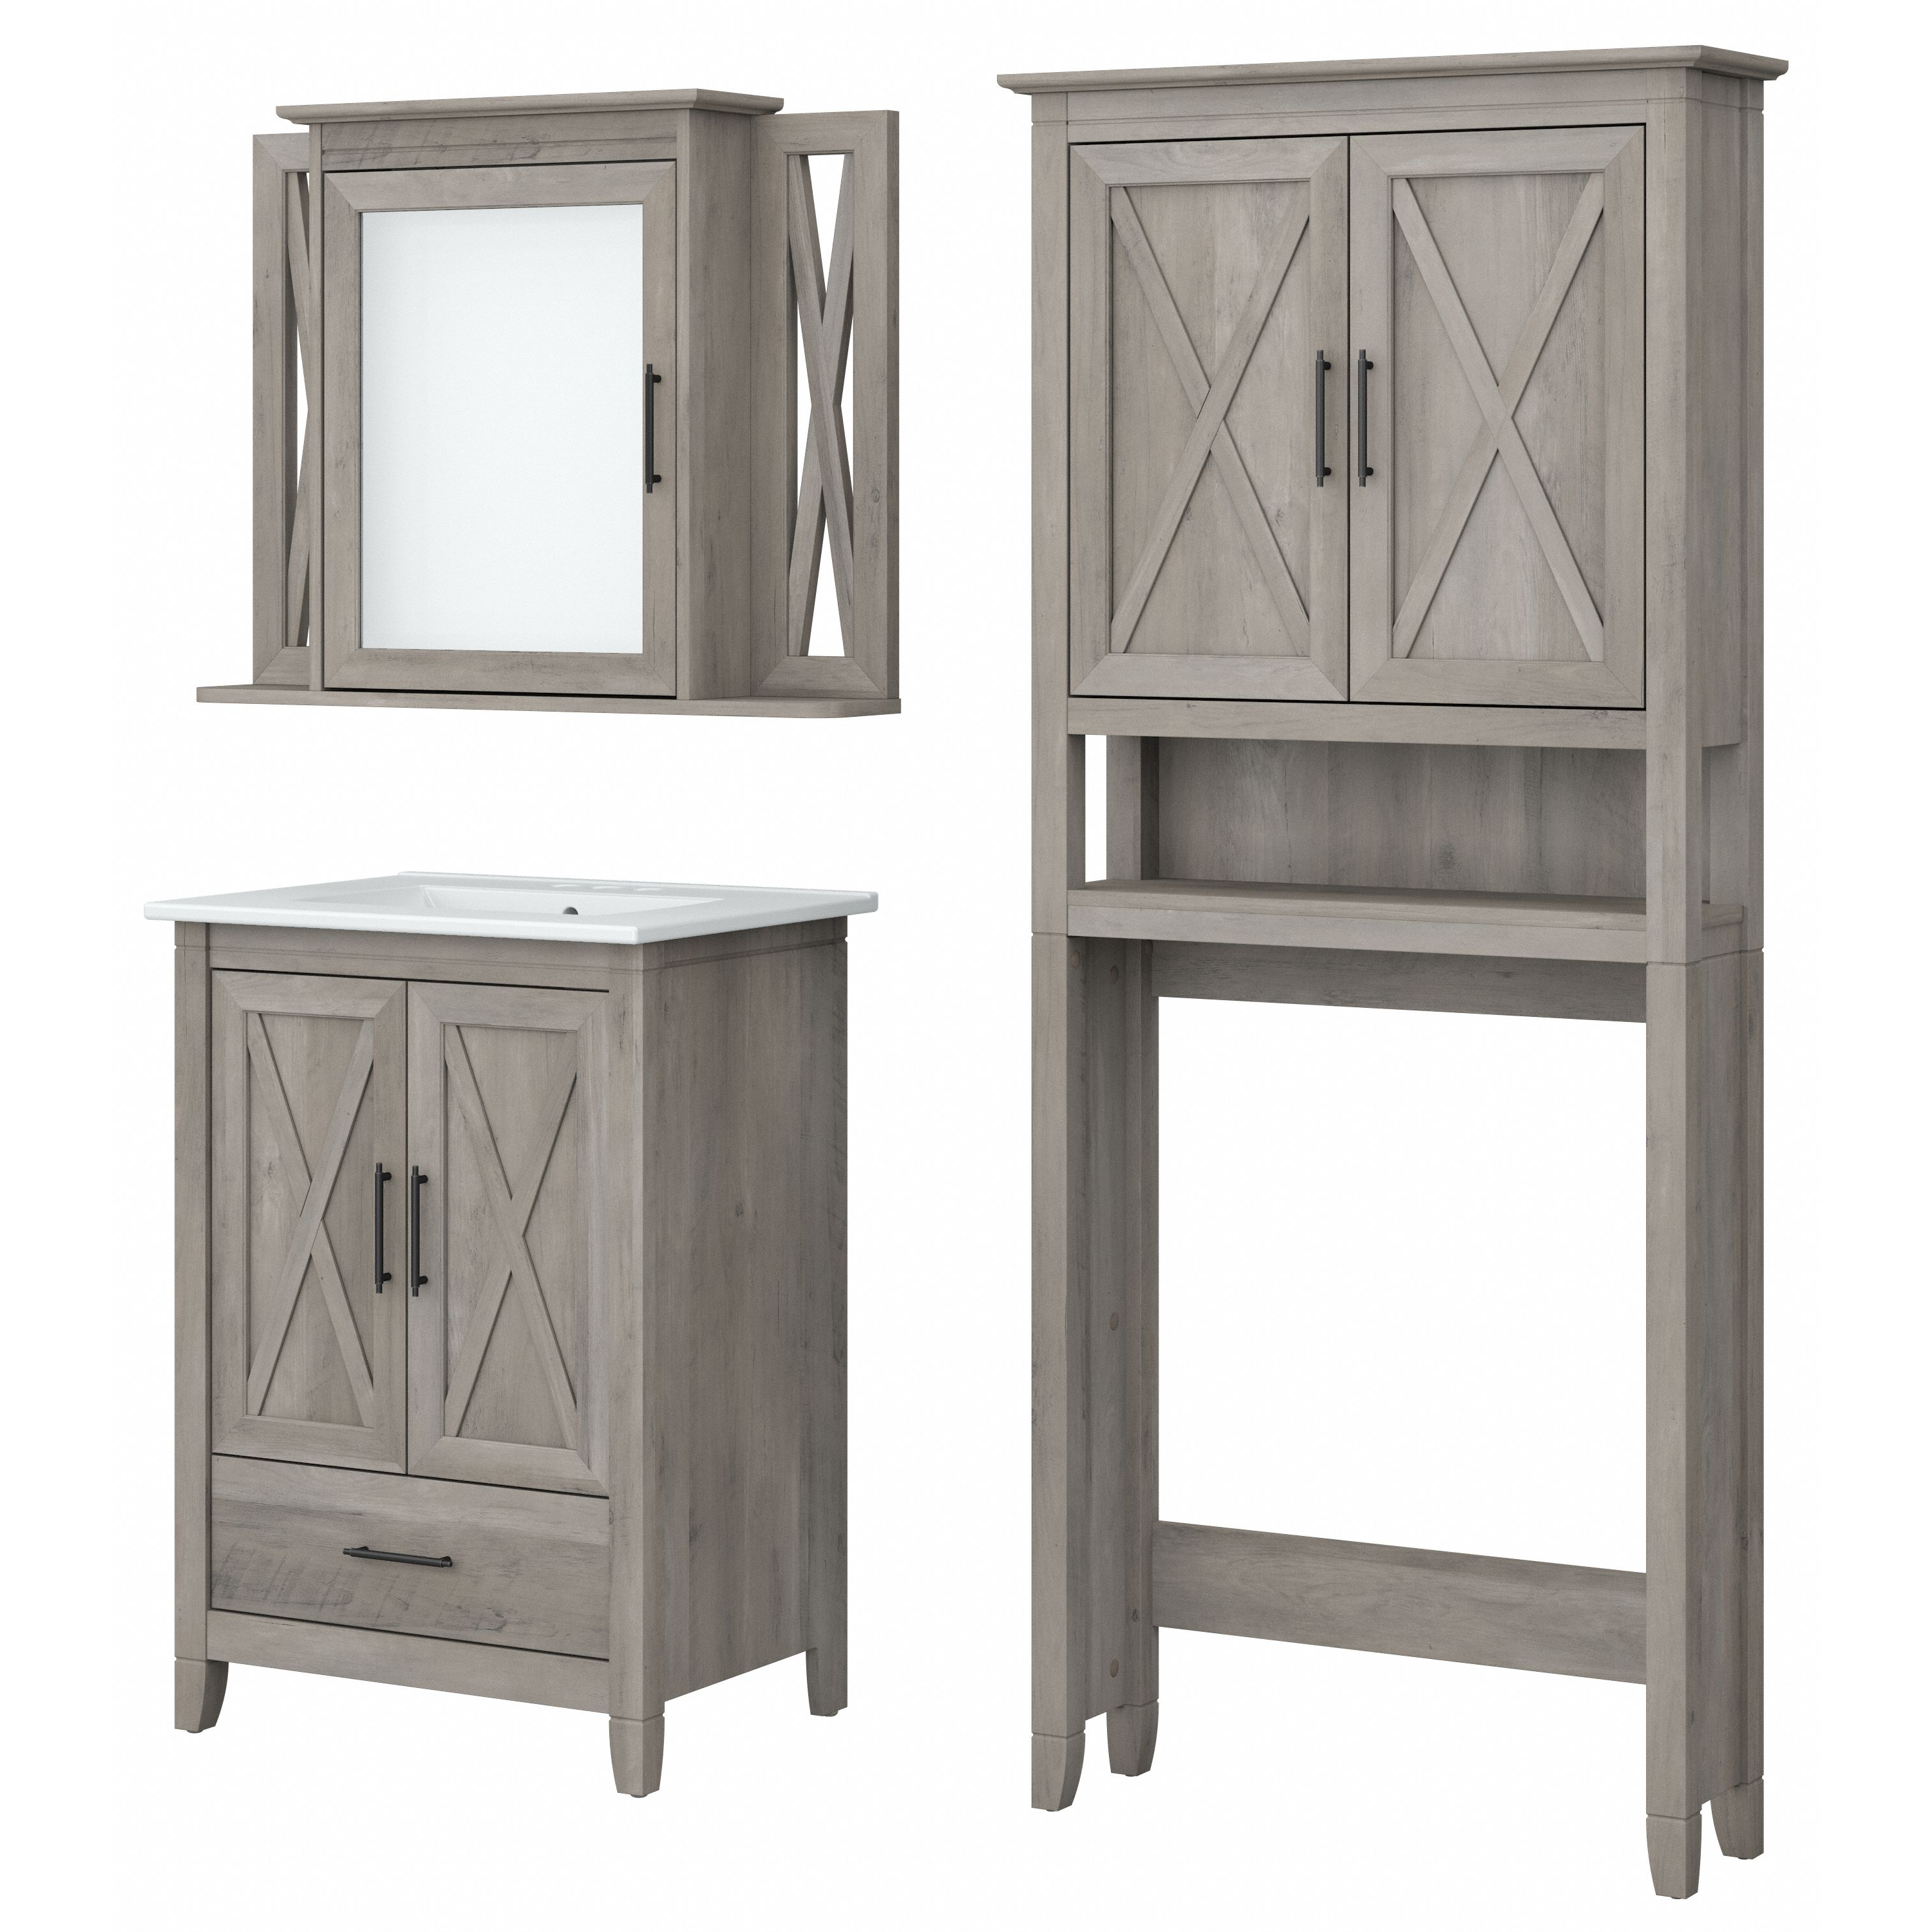 Shop Bush Furniture Key West 24W Bathroom Vanity Sink with Mirror and Over The Toilet Storage Cabinet 02 KWS031DG #color_driftwood gray